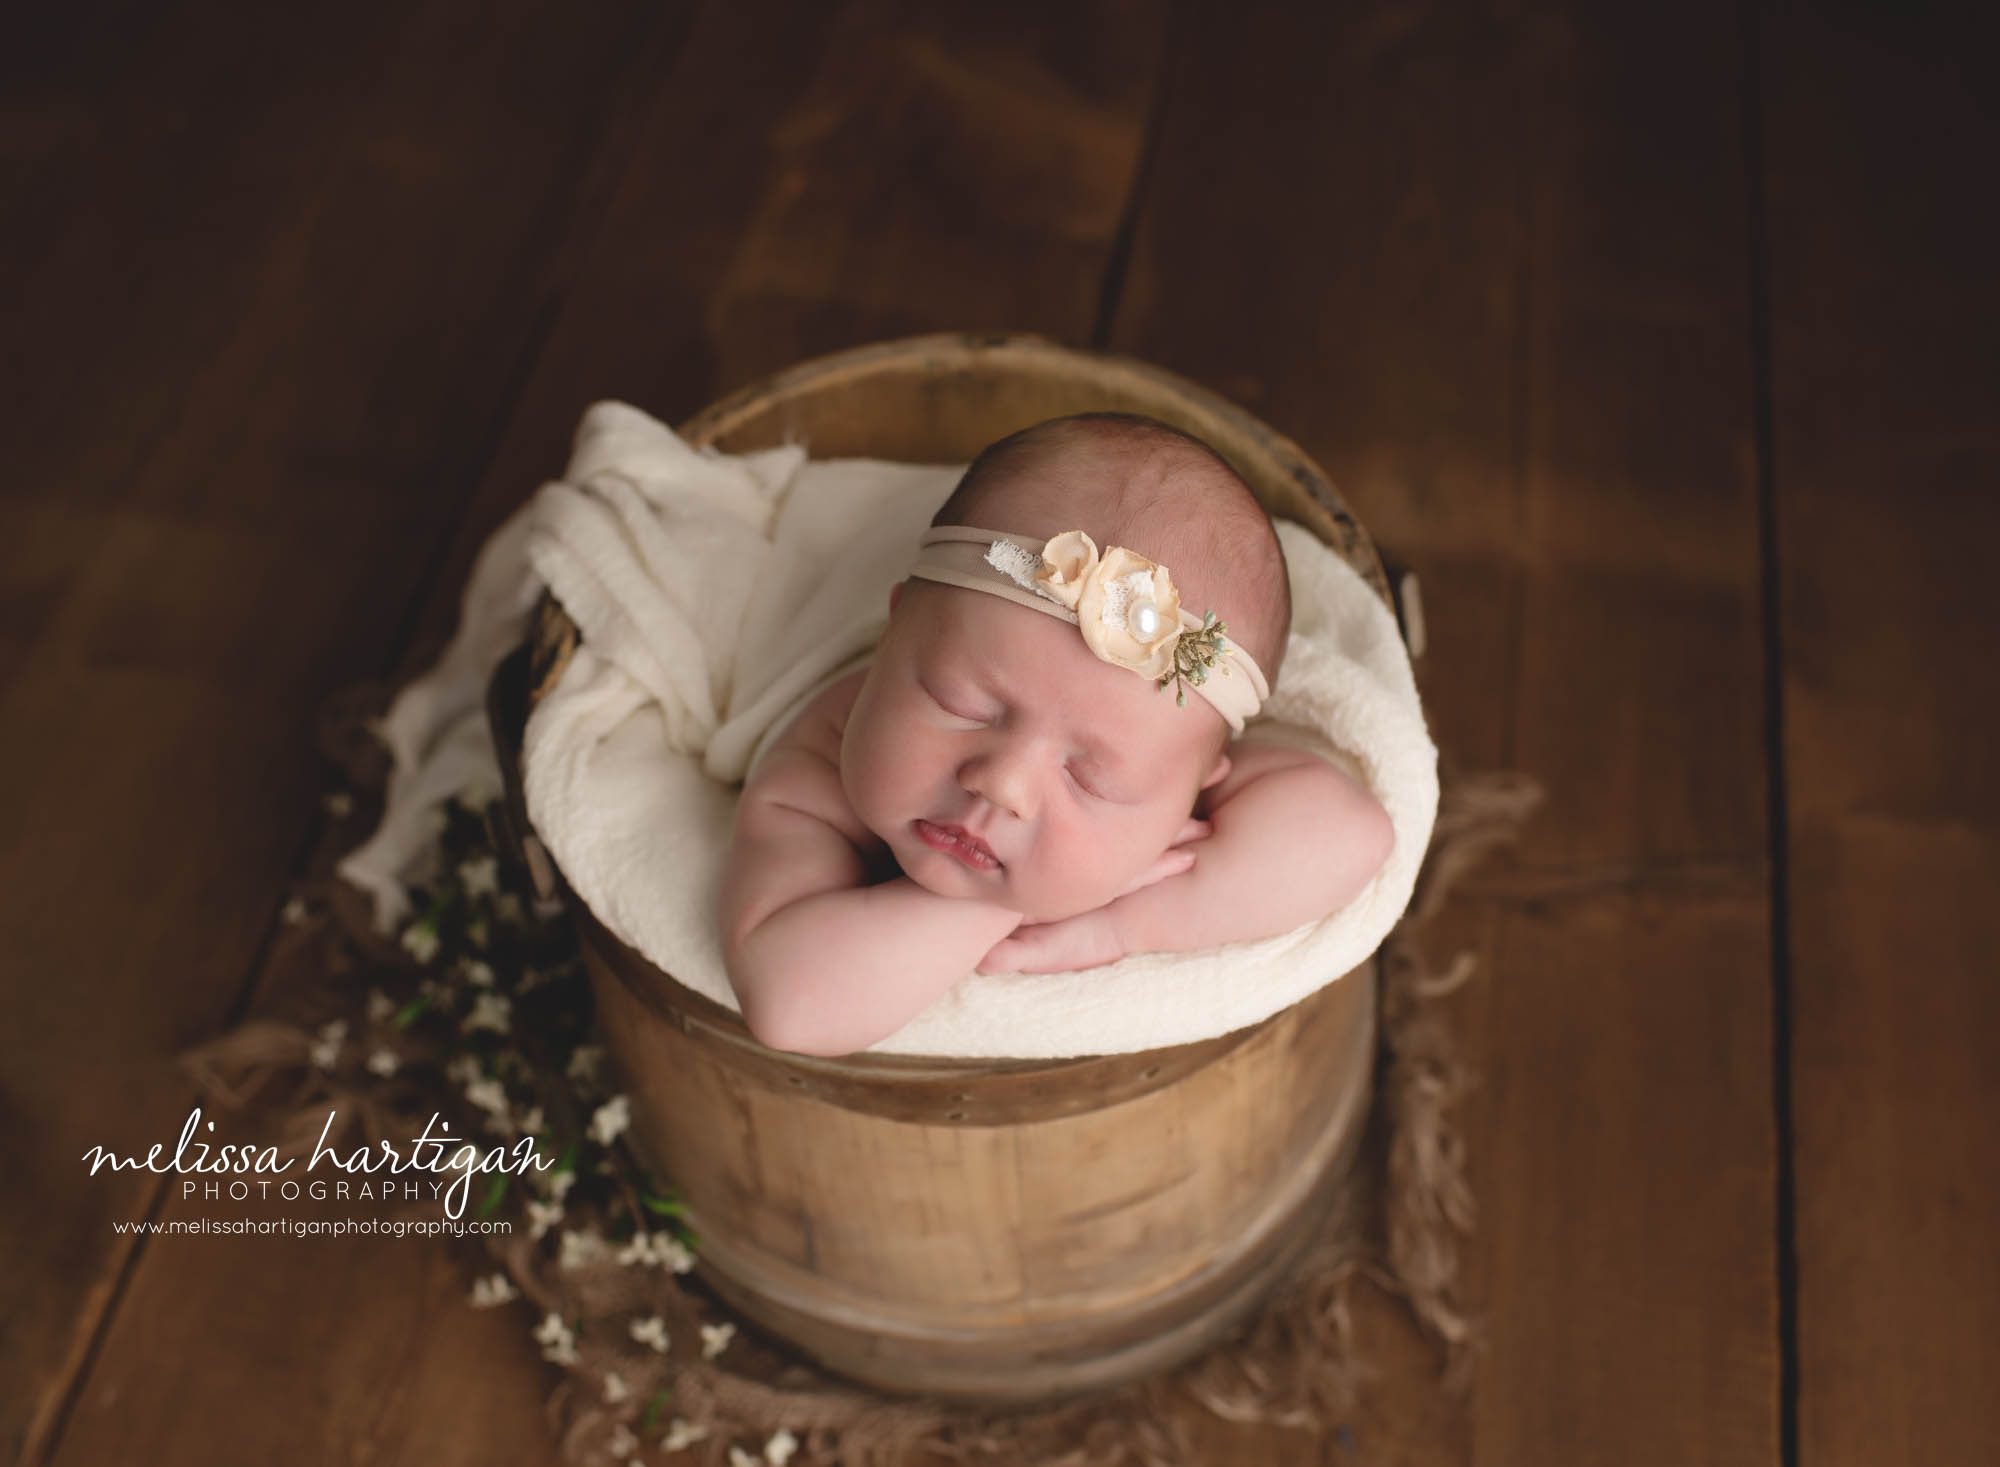 Baby girl posed in bucket with cream and peach floral headband